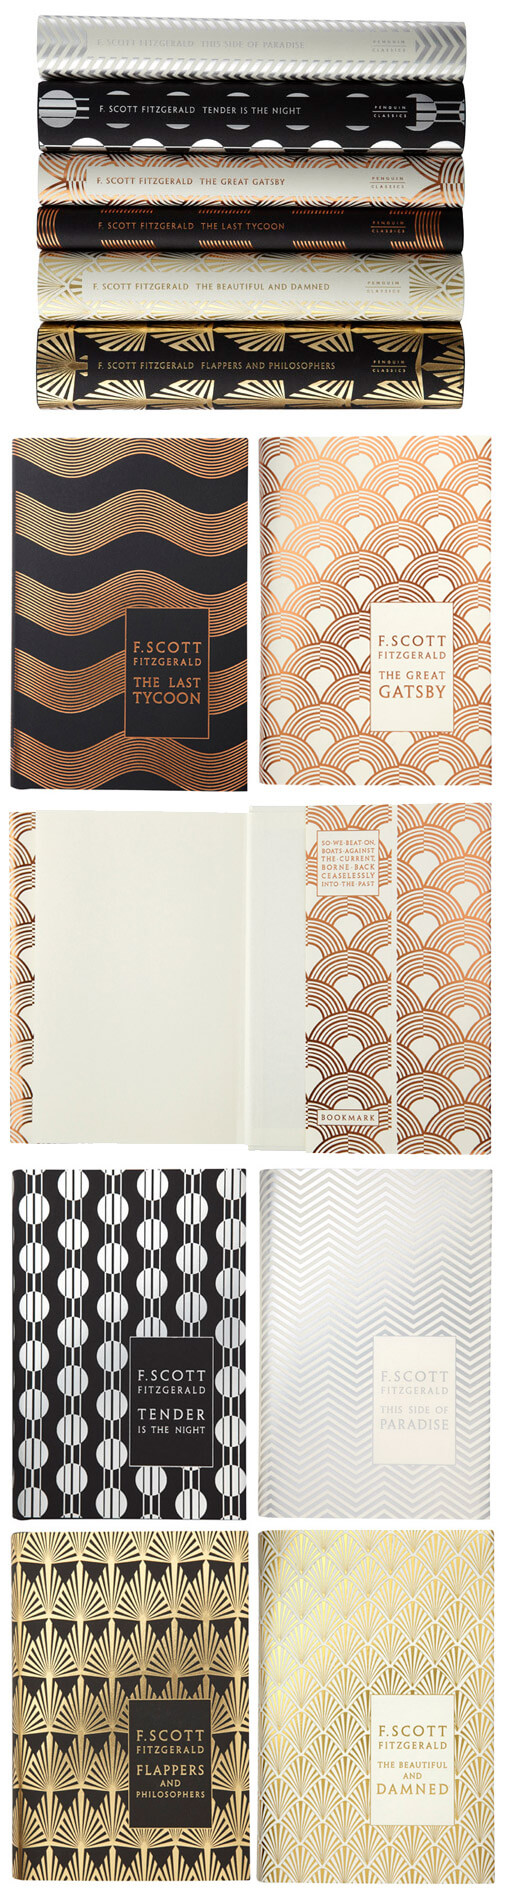 F. Scott Fitzgerald books with metallic, art deco patterned covers